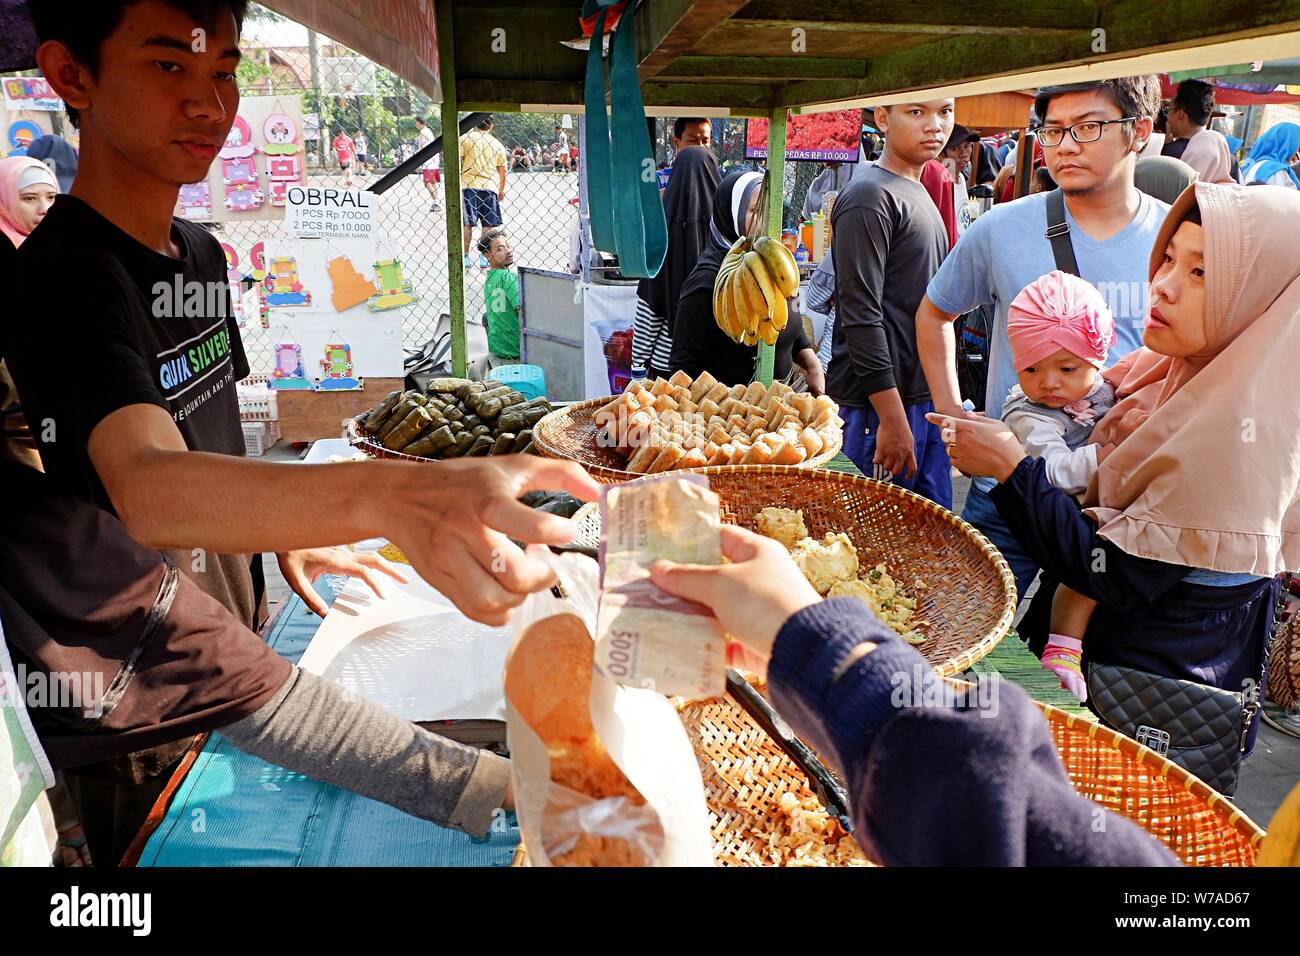 A view of seller and buyer in a street food booth. Stock Photo